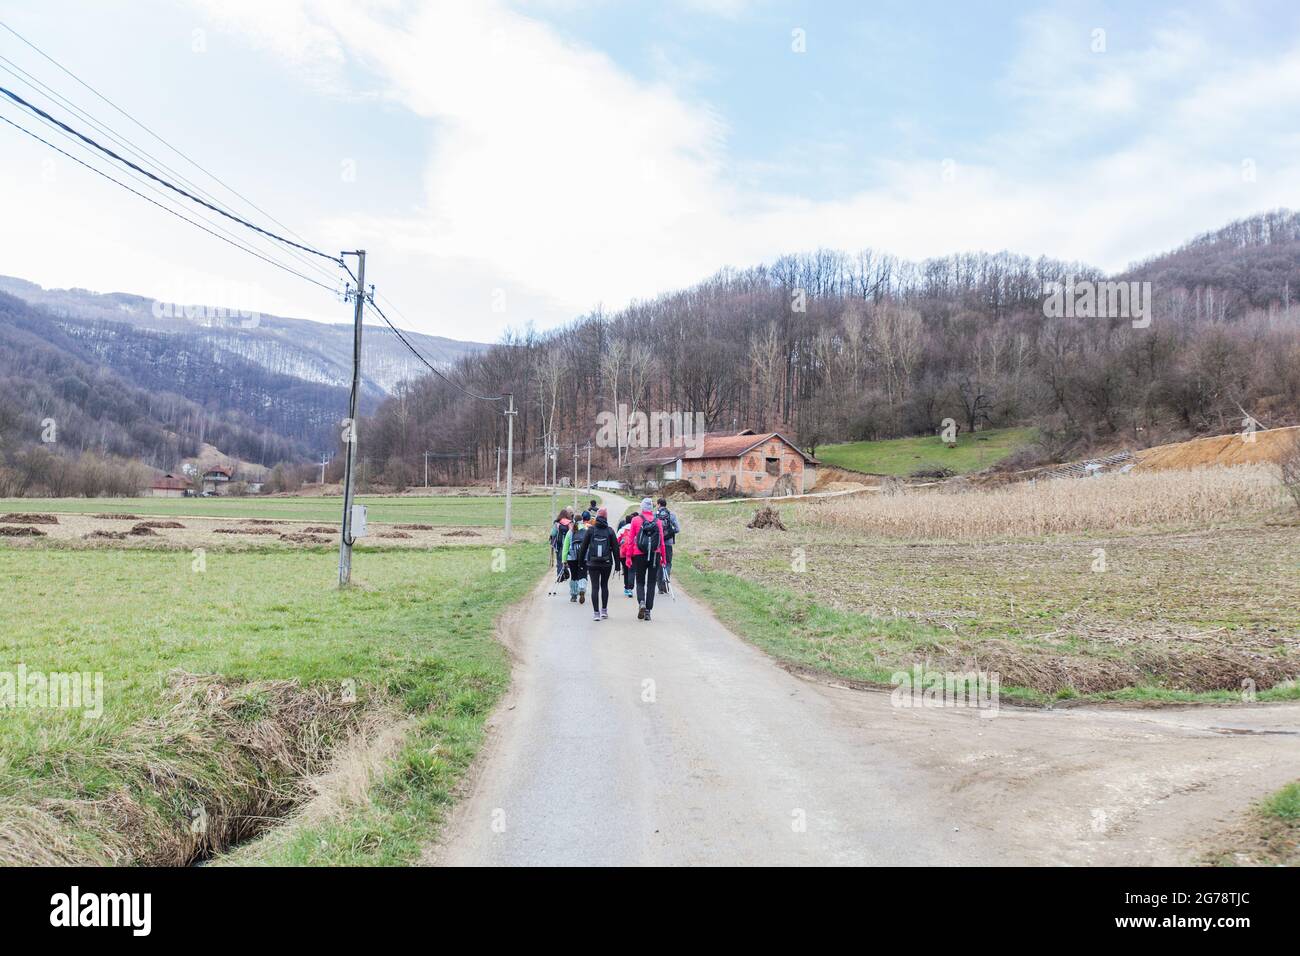 Hiking, Travel, Healthy Lifestyle. Group of active people with backpack walking on a rural road in early spring day. Stock Photo